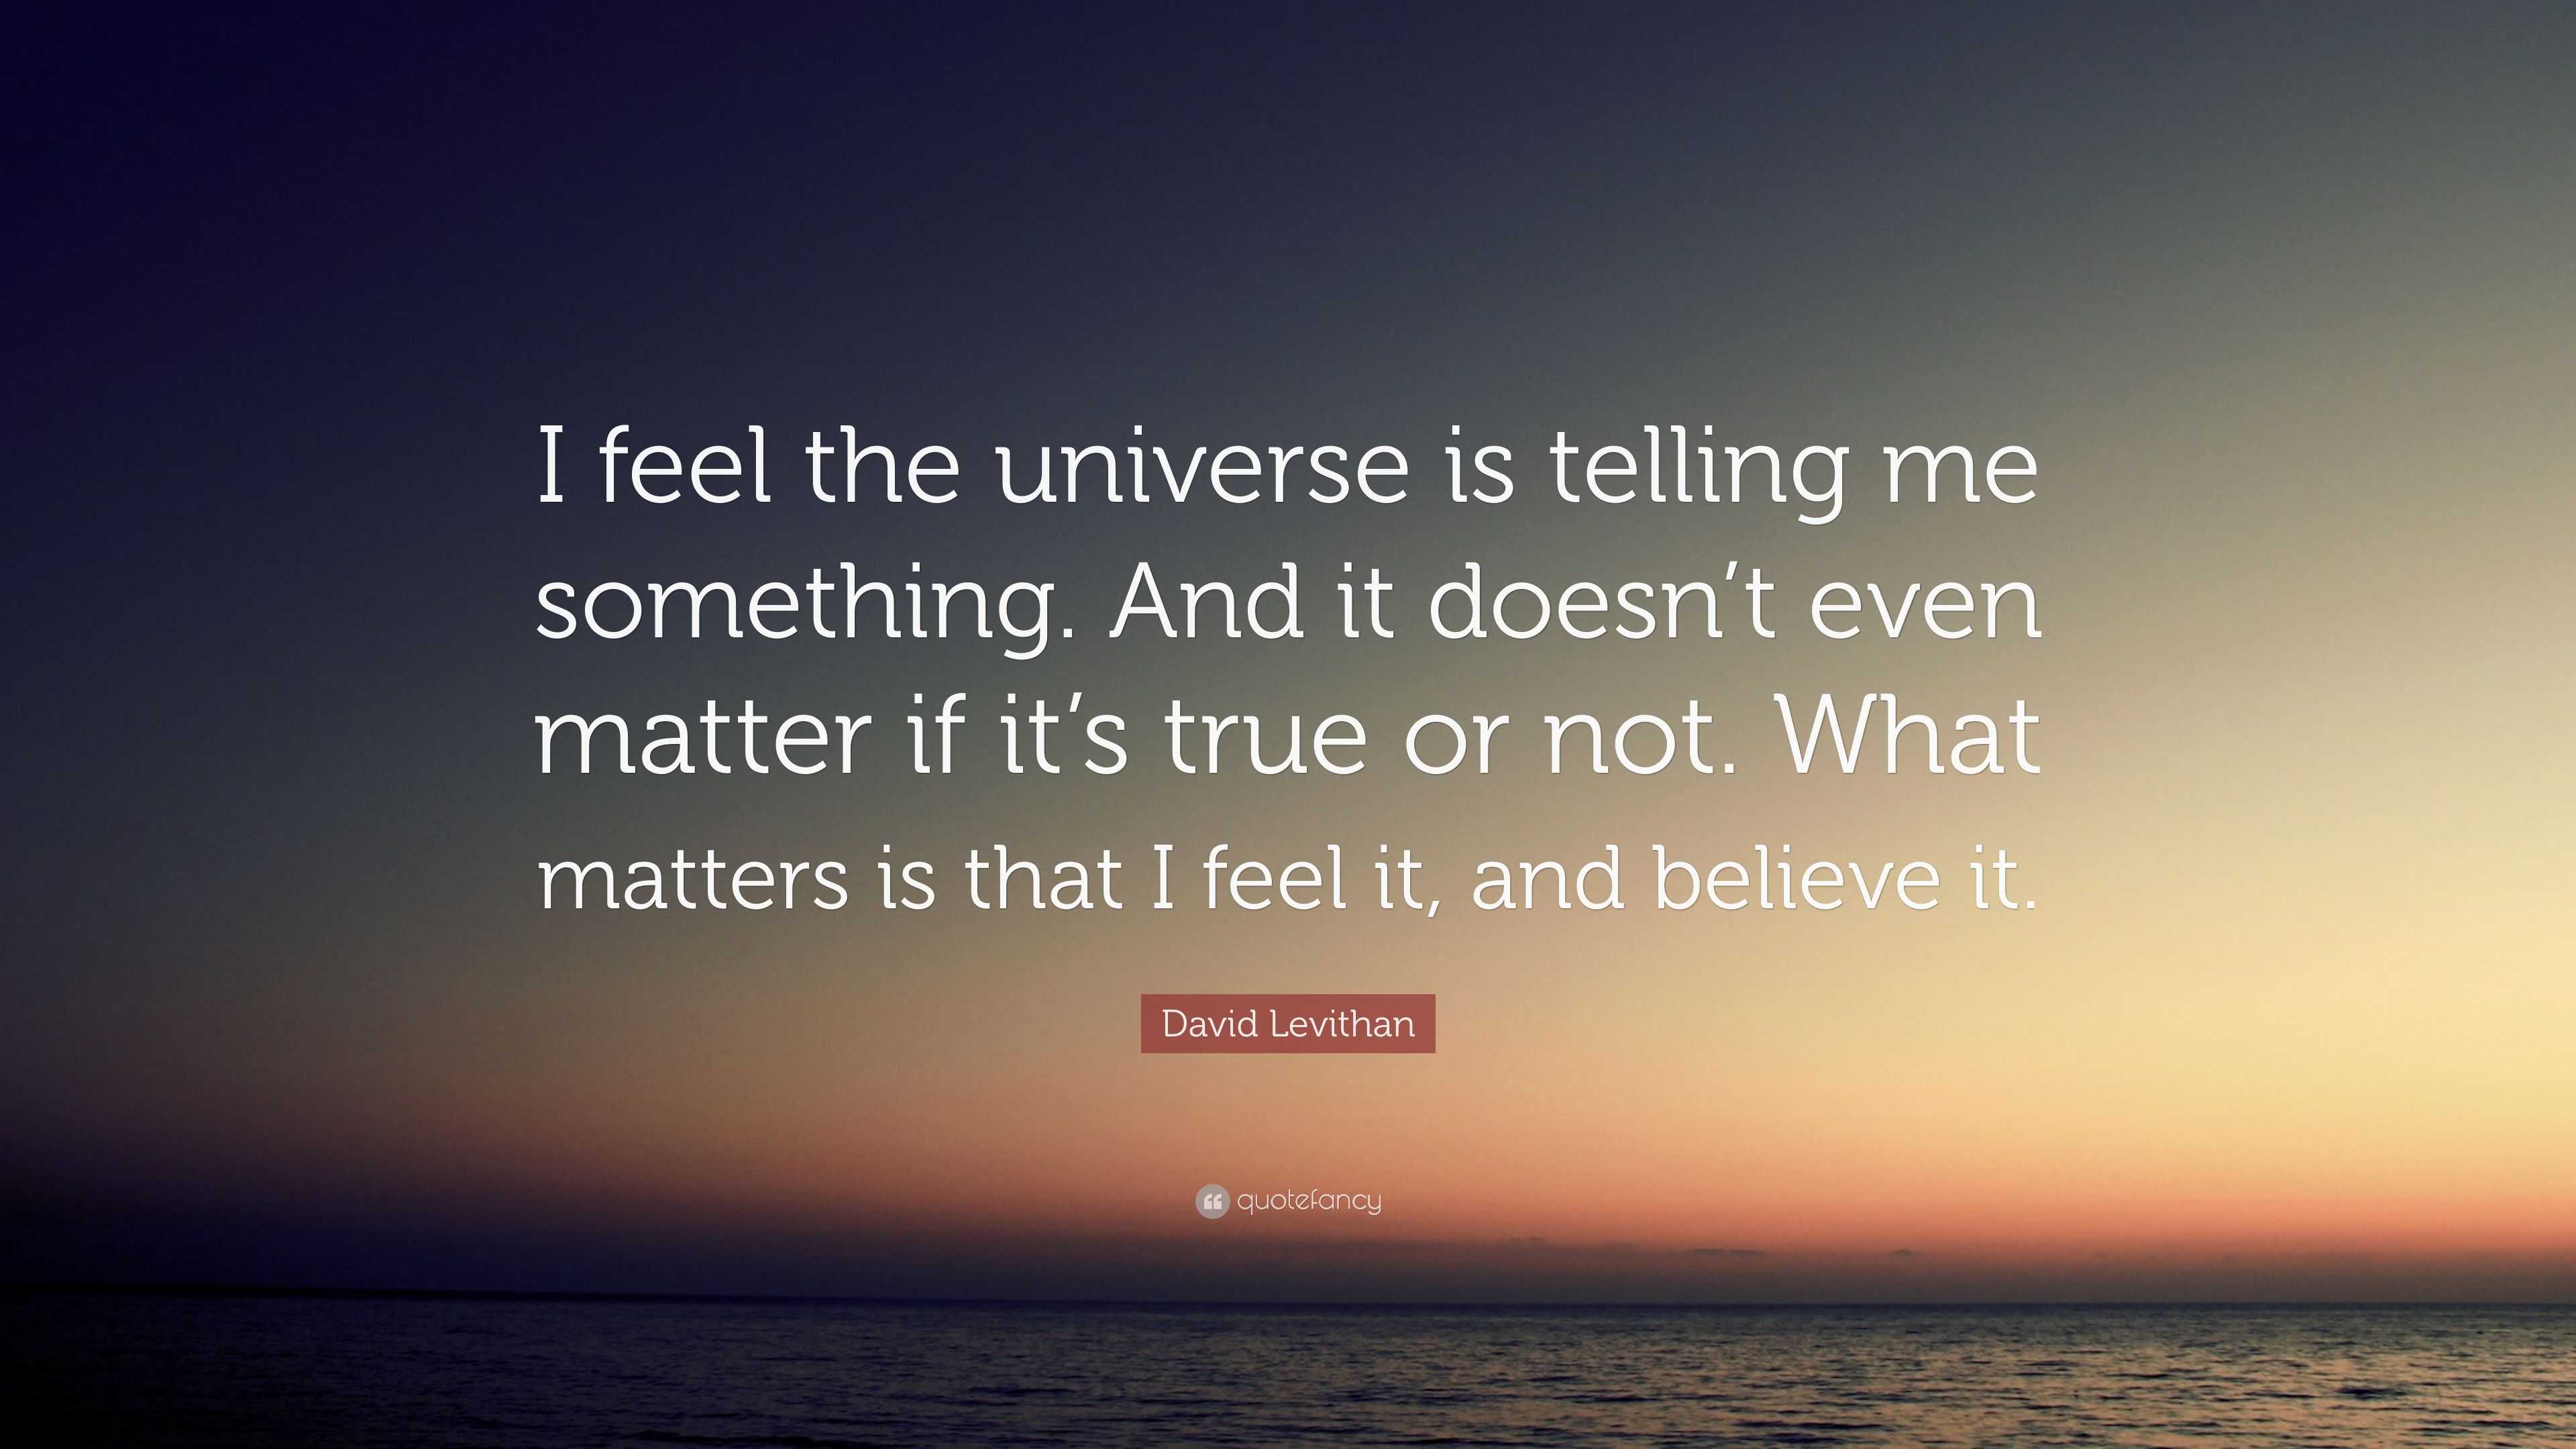 David Levithan Quote I Feel The Universe Is Telling Me Something And It Doesn T Even Matter If It S True Or Not What Matters Is That I Feel